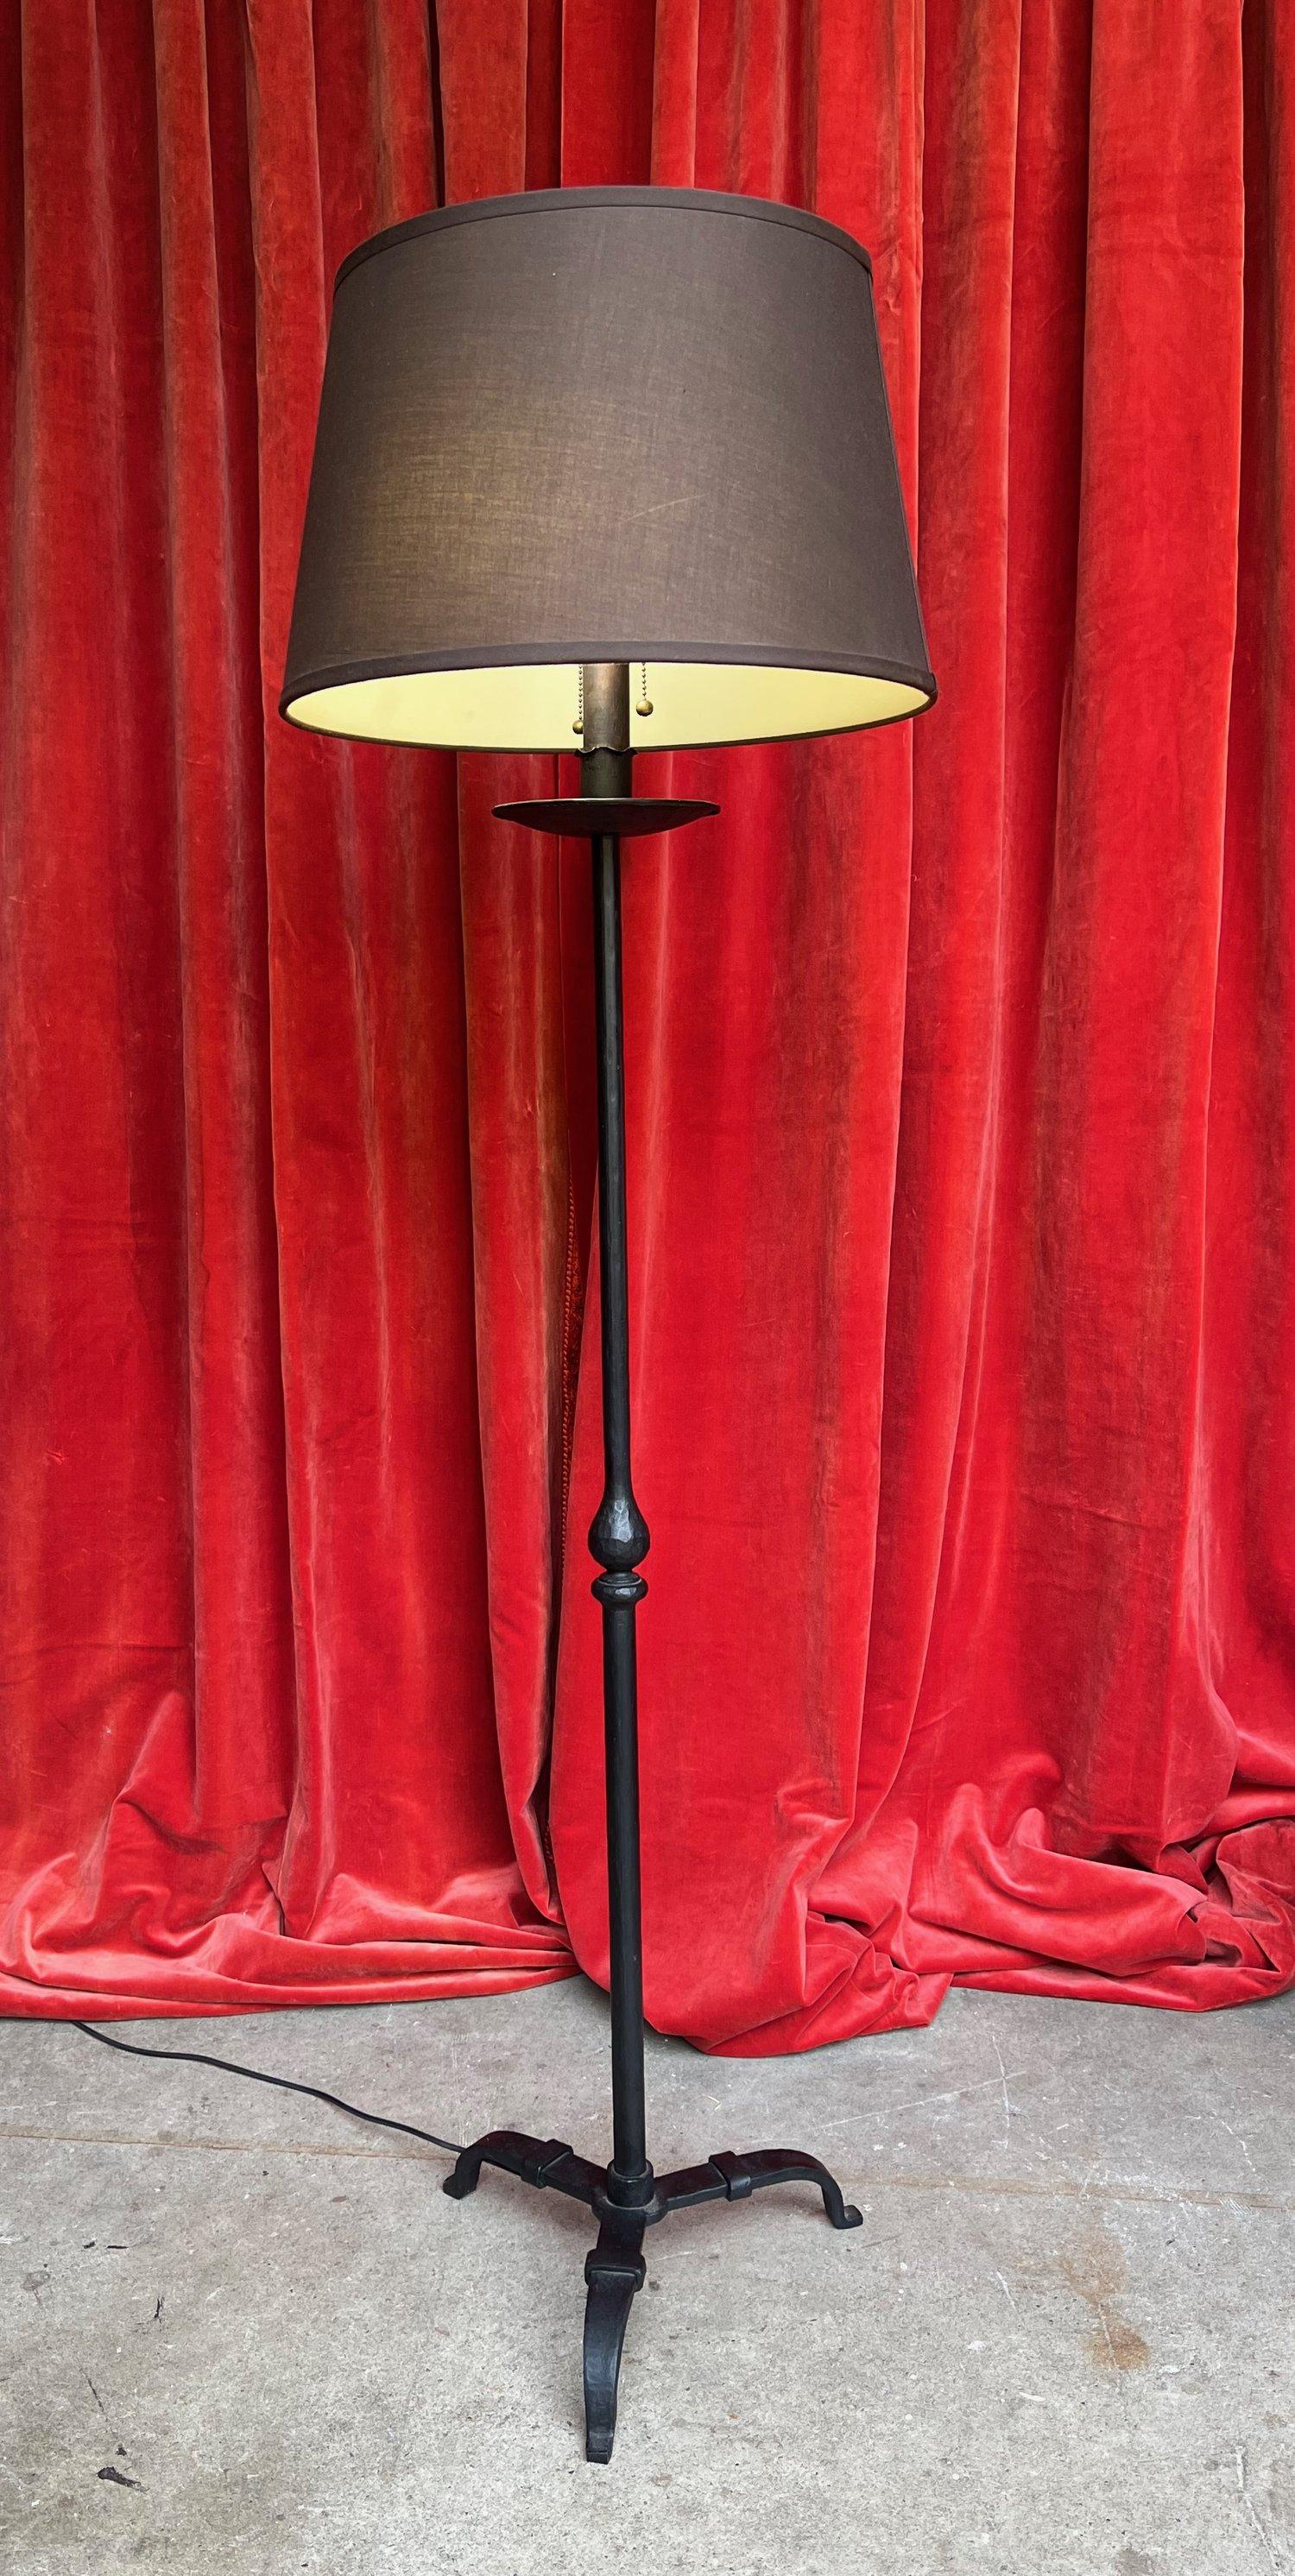 A unique and elegant mid-century modern Spanish iron floor lamp that perfectly blends style and functionality. Hand made in the 1950s, this exceptional piece boasts excellent quality and timeless appeal. Standing at 62 inches high with a 14½ inch